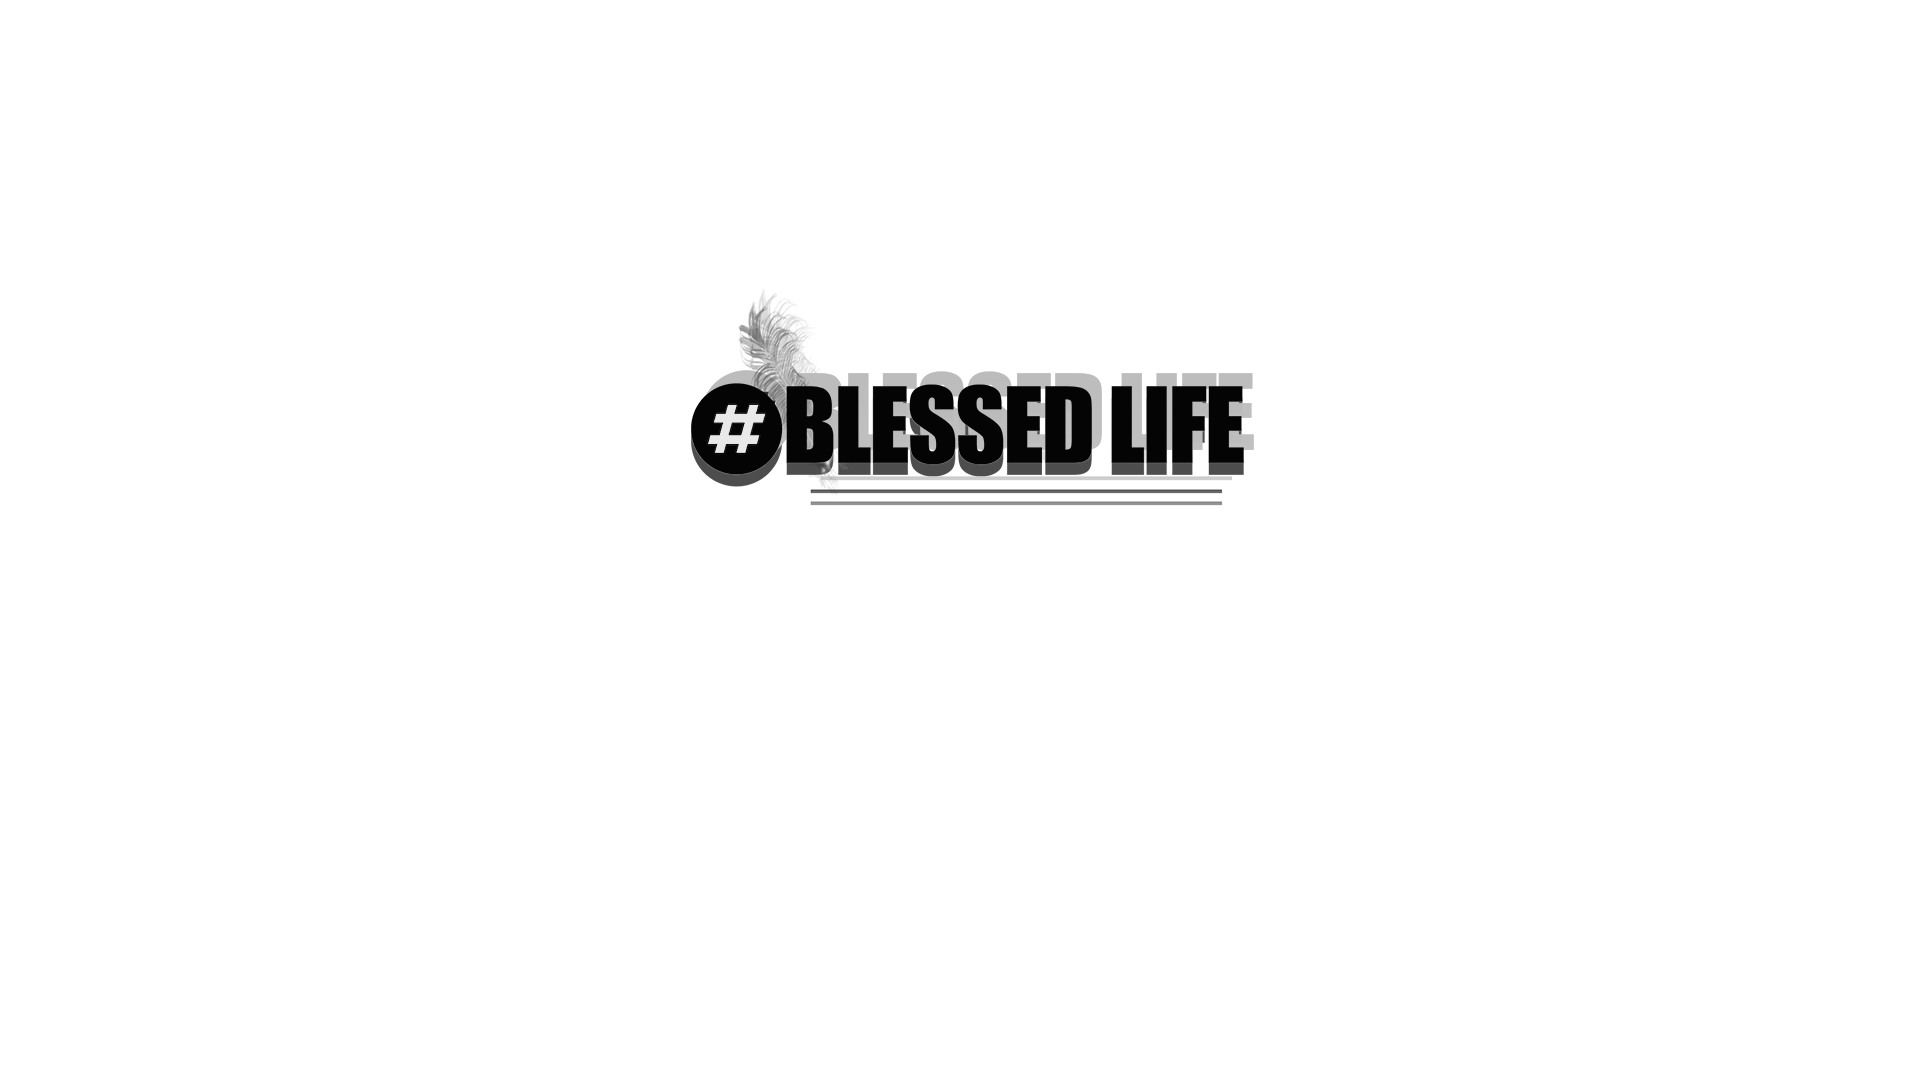 Load video: BLESSED LIFE COMMERCIAL